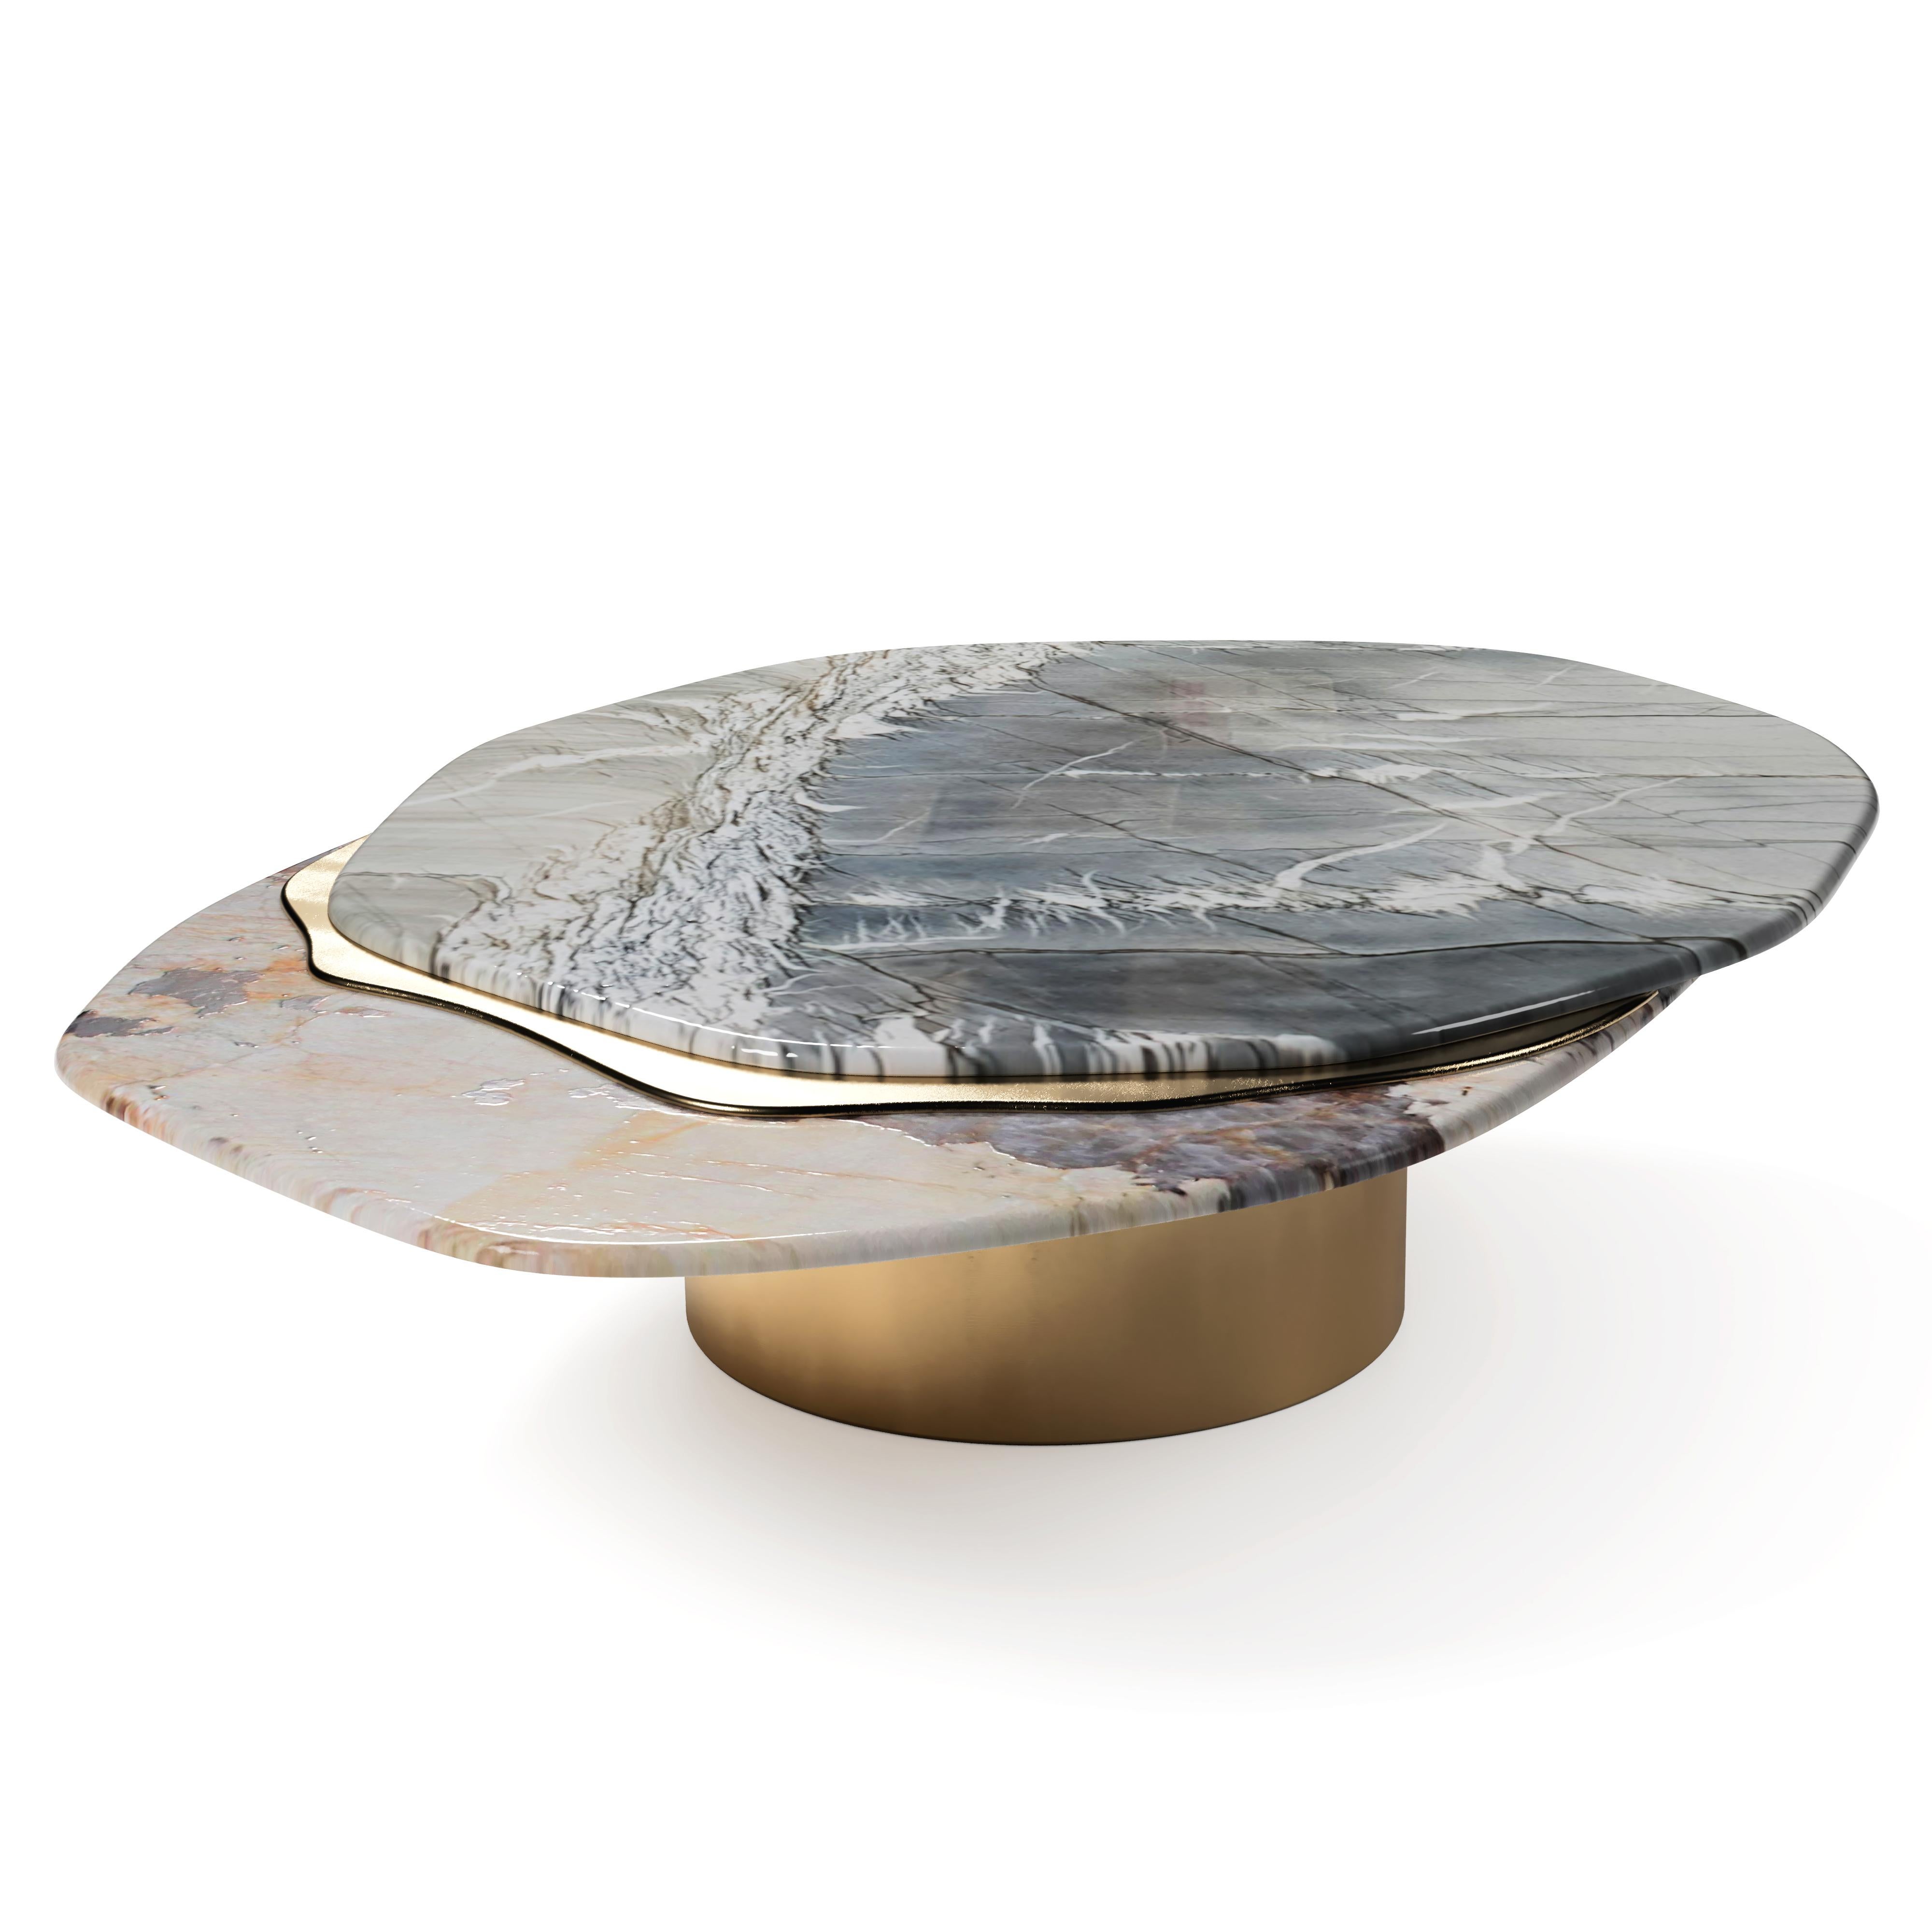 Steel The Elements VII Coffee Table, 1 of 1 by Grzegorz Majka